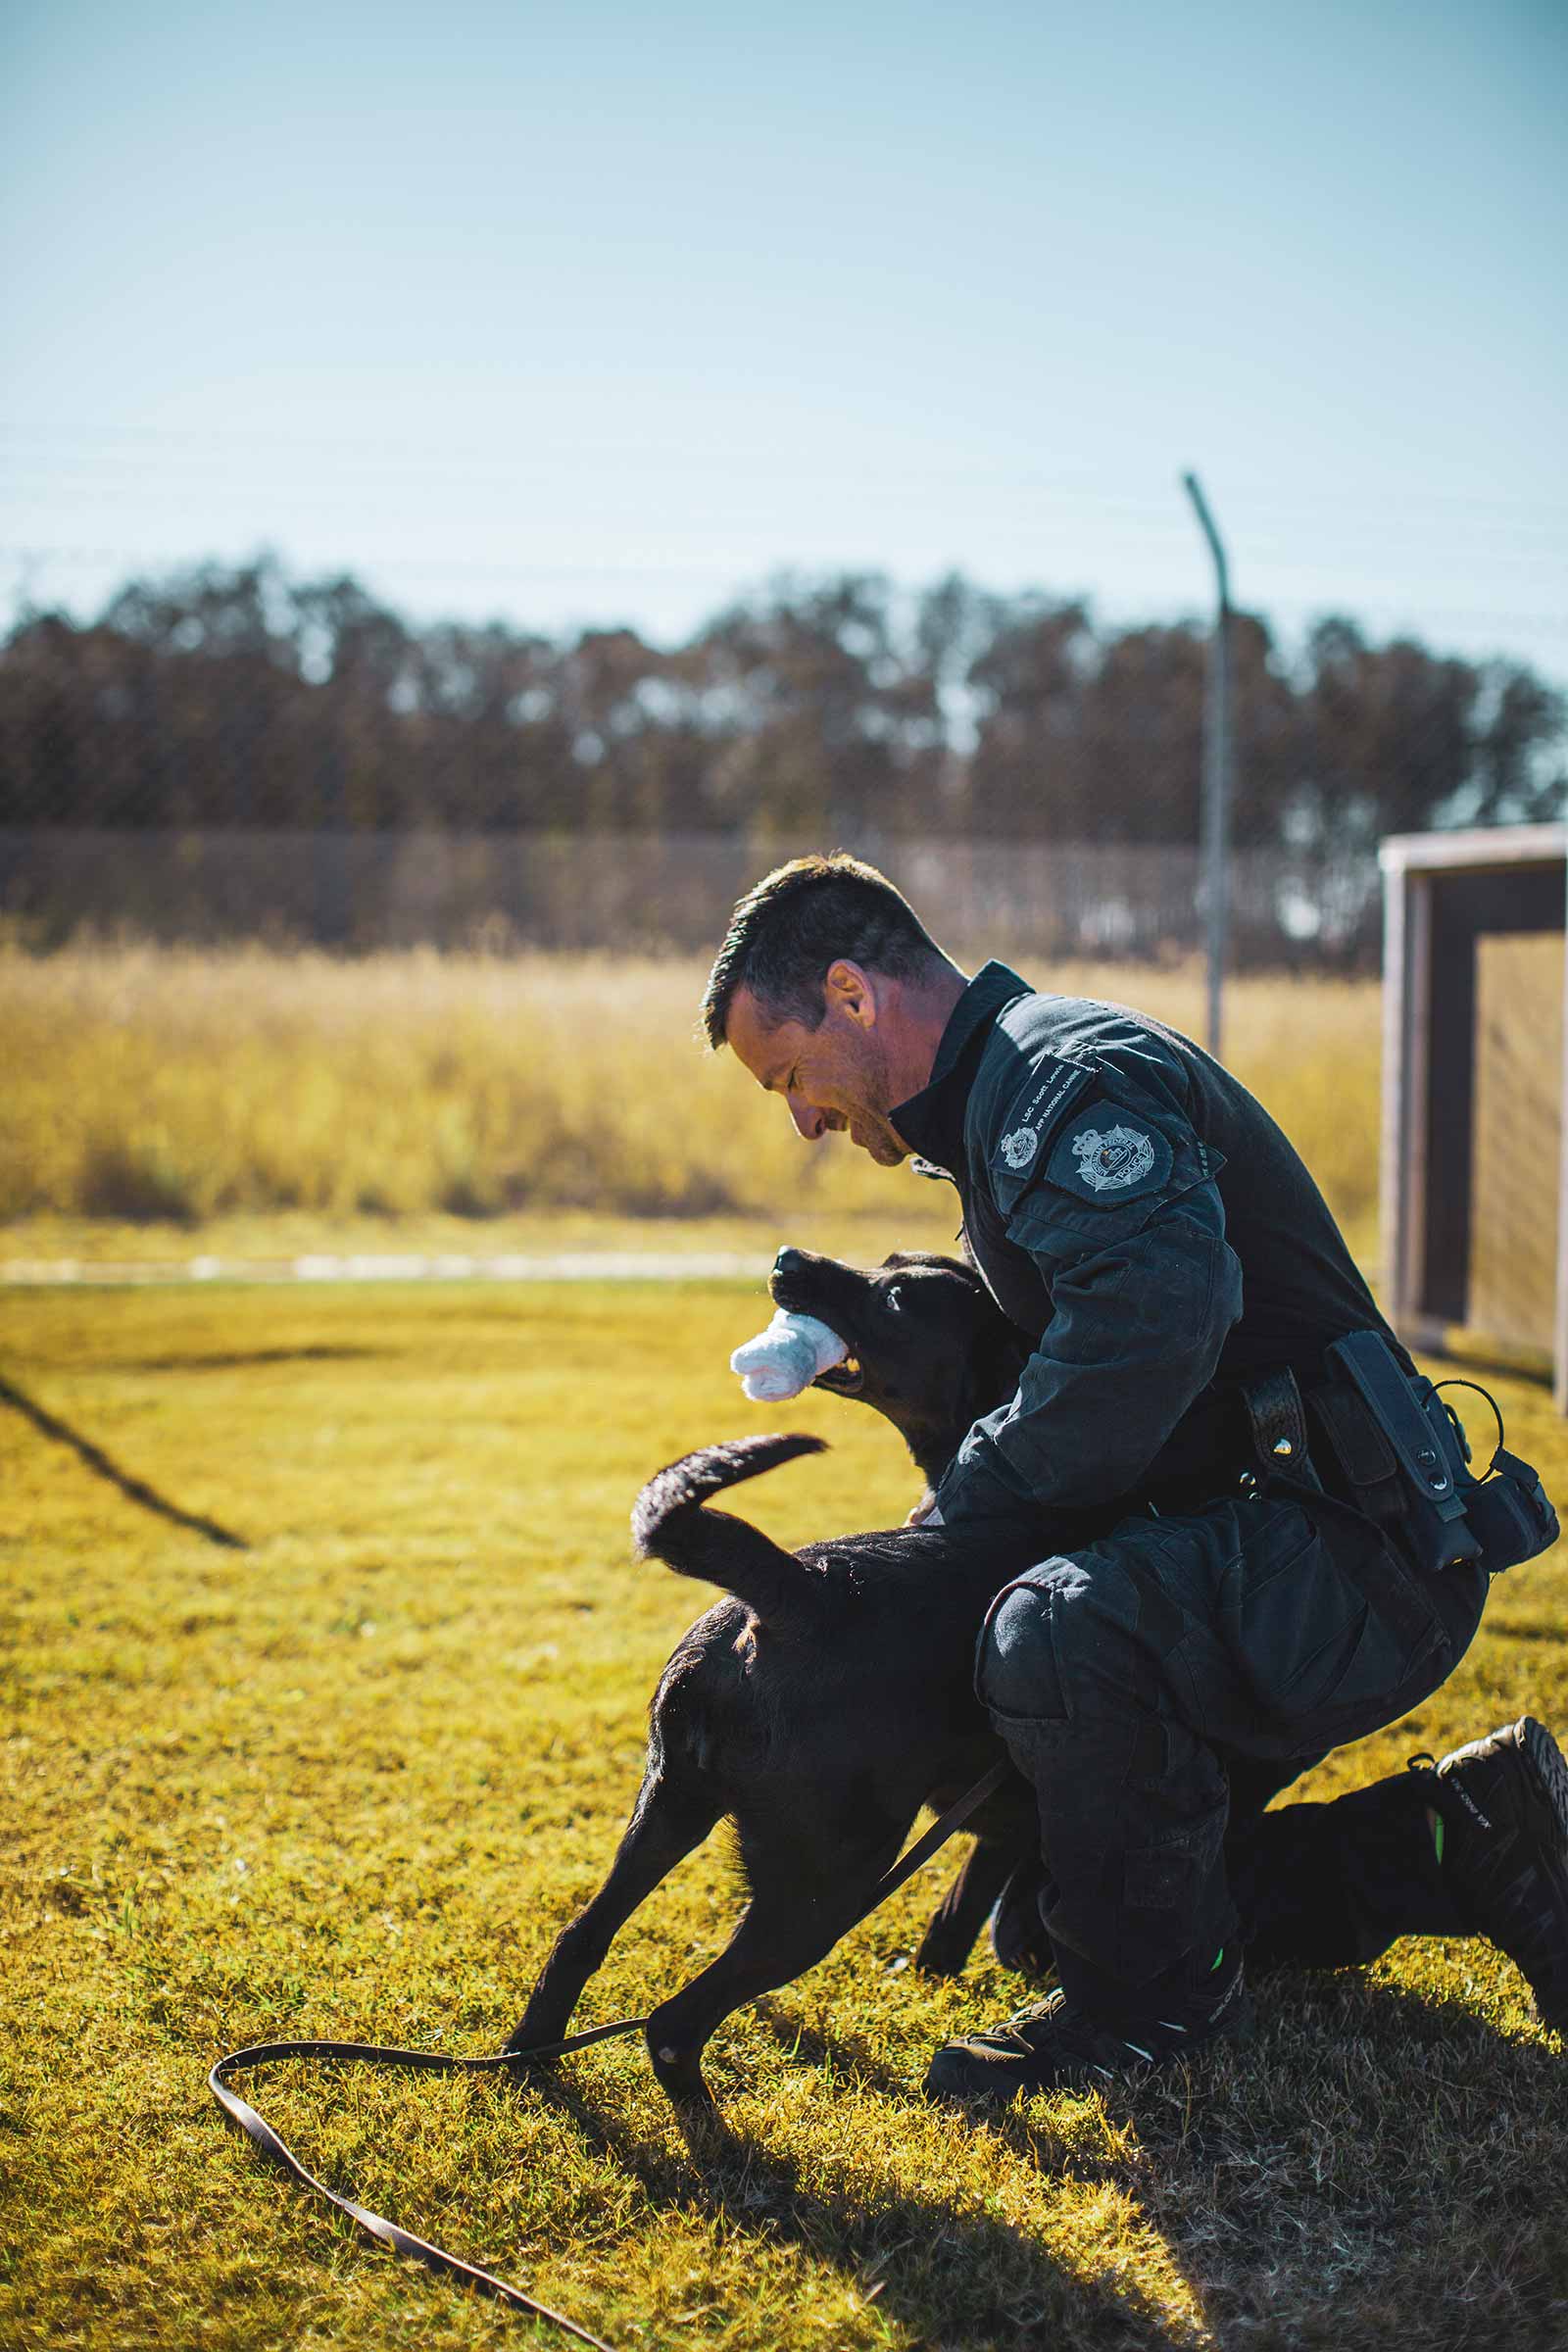 The AFP Canine Program training is based on repetition and reward